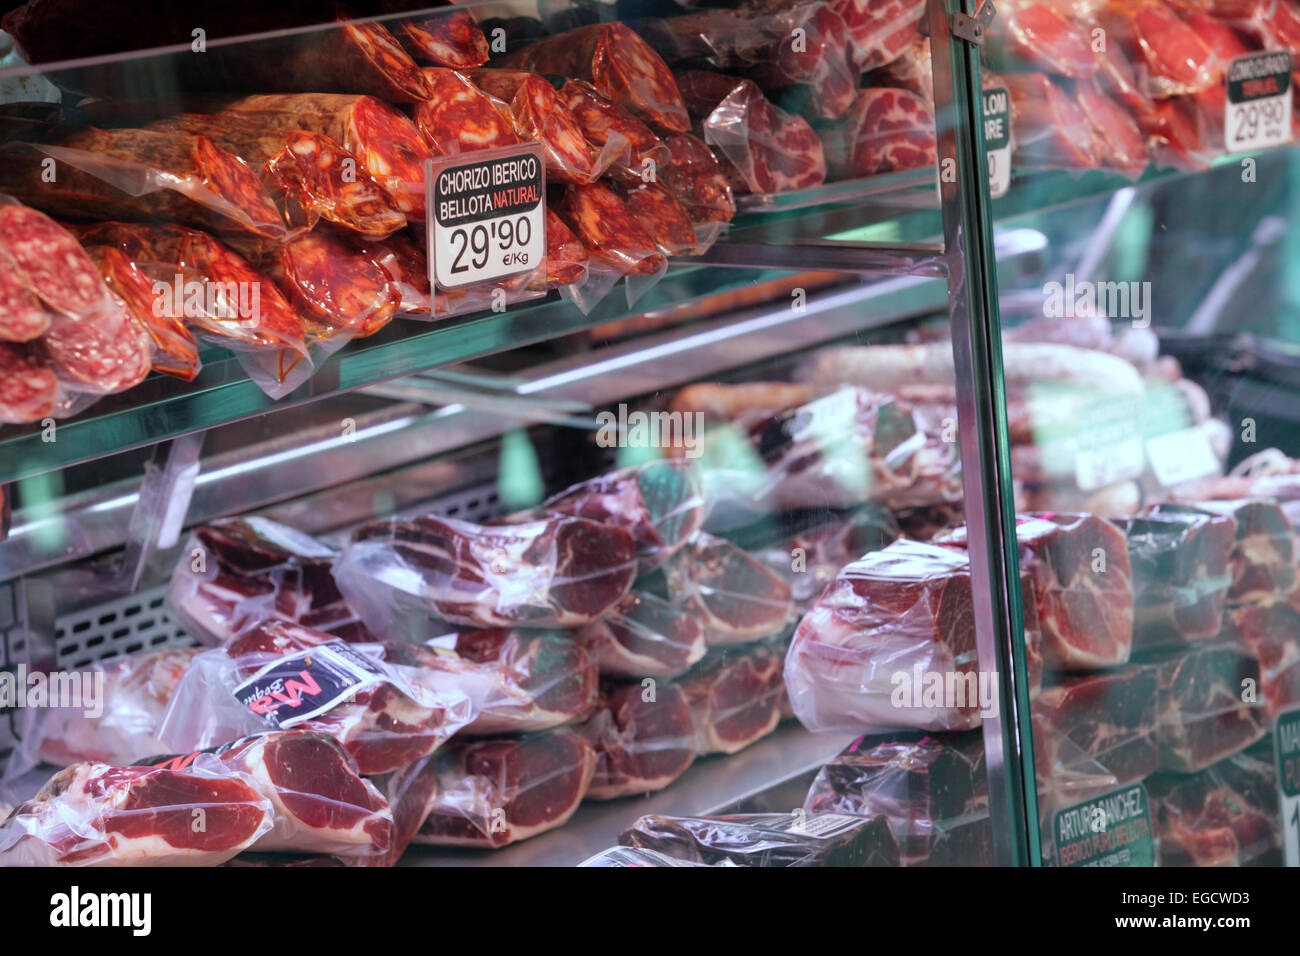 Preserved meat, pork sausage, ham and other meat, market stall Barcelona, Spain Stock Photo